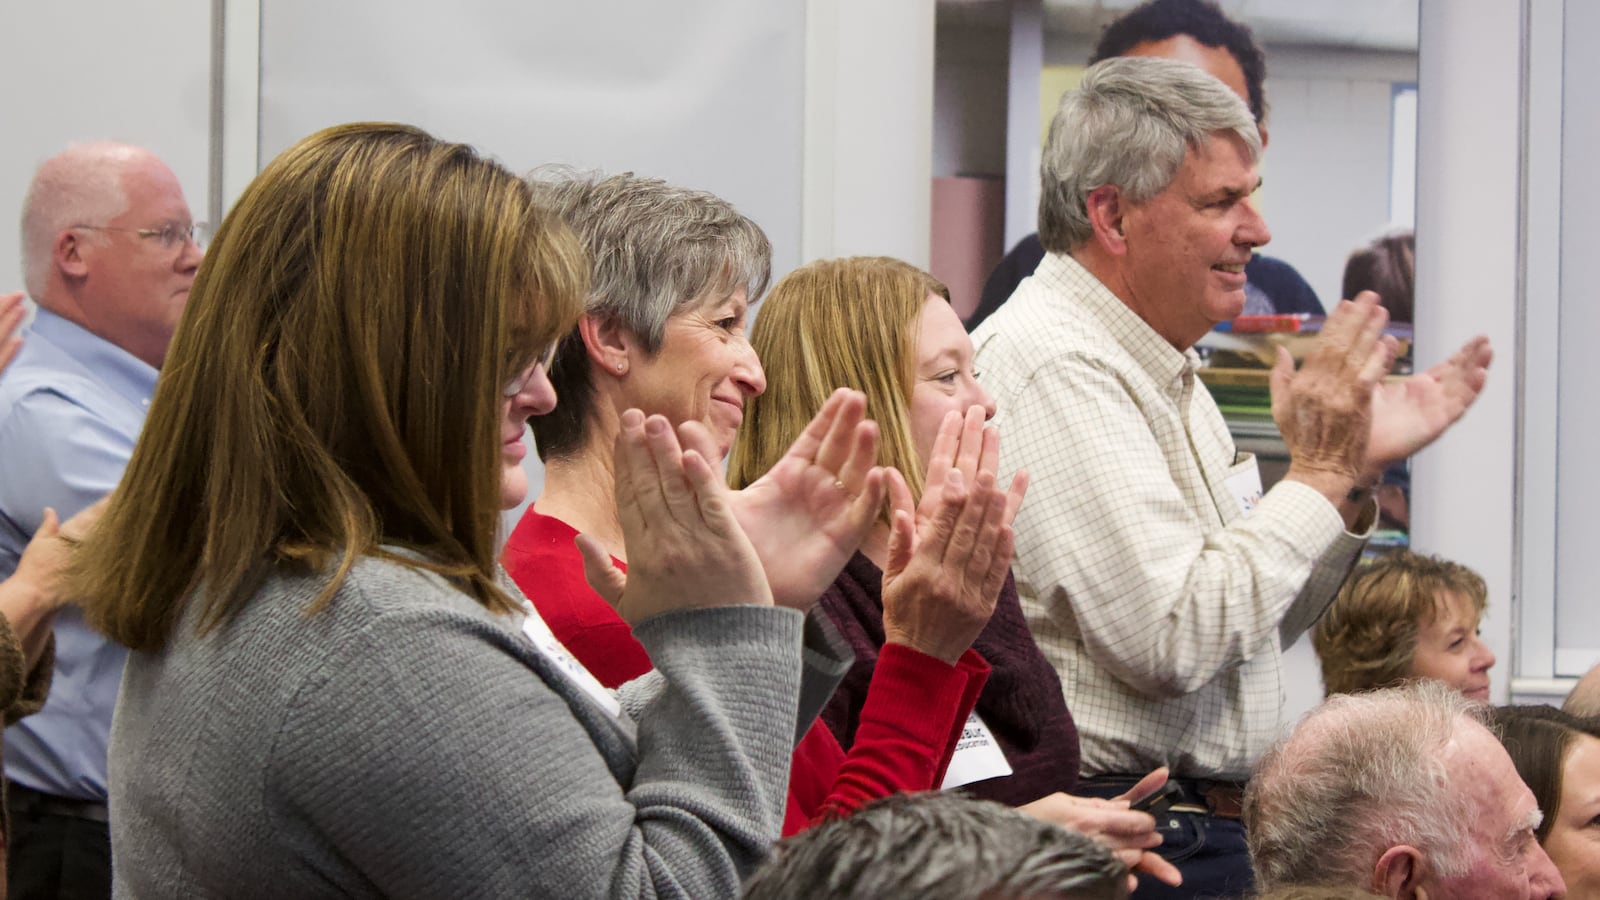 Cindy Barnard, second from left, applauds after the Douglas County school board voted to end the district's voucher program. Barnard is one of the original plaintiffs in the voucher court case. (Photo by Nic Garcia/Chalkbeat)